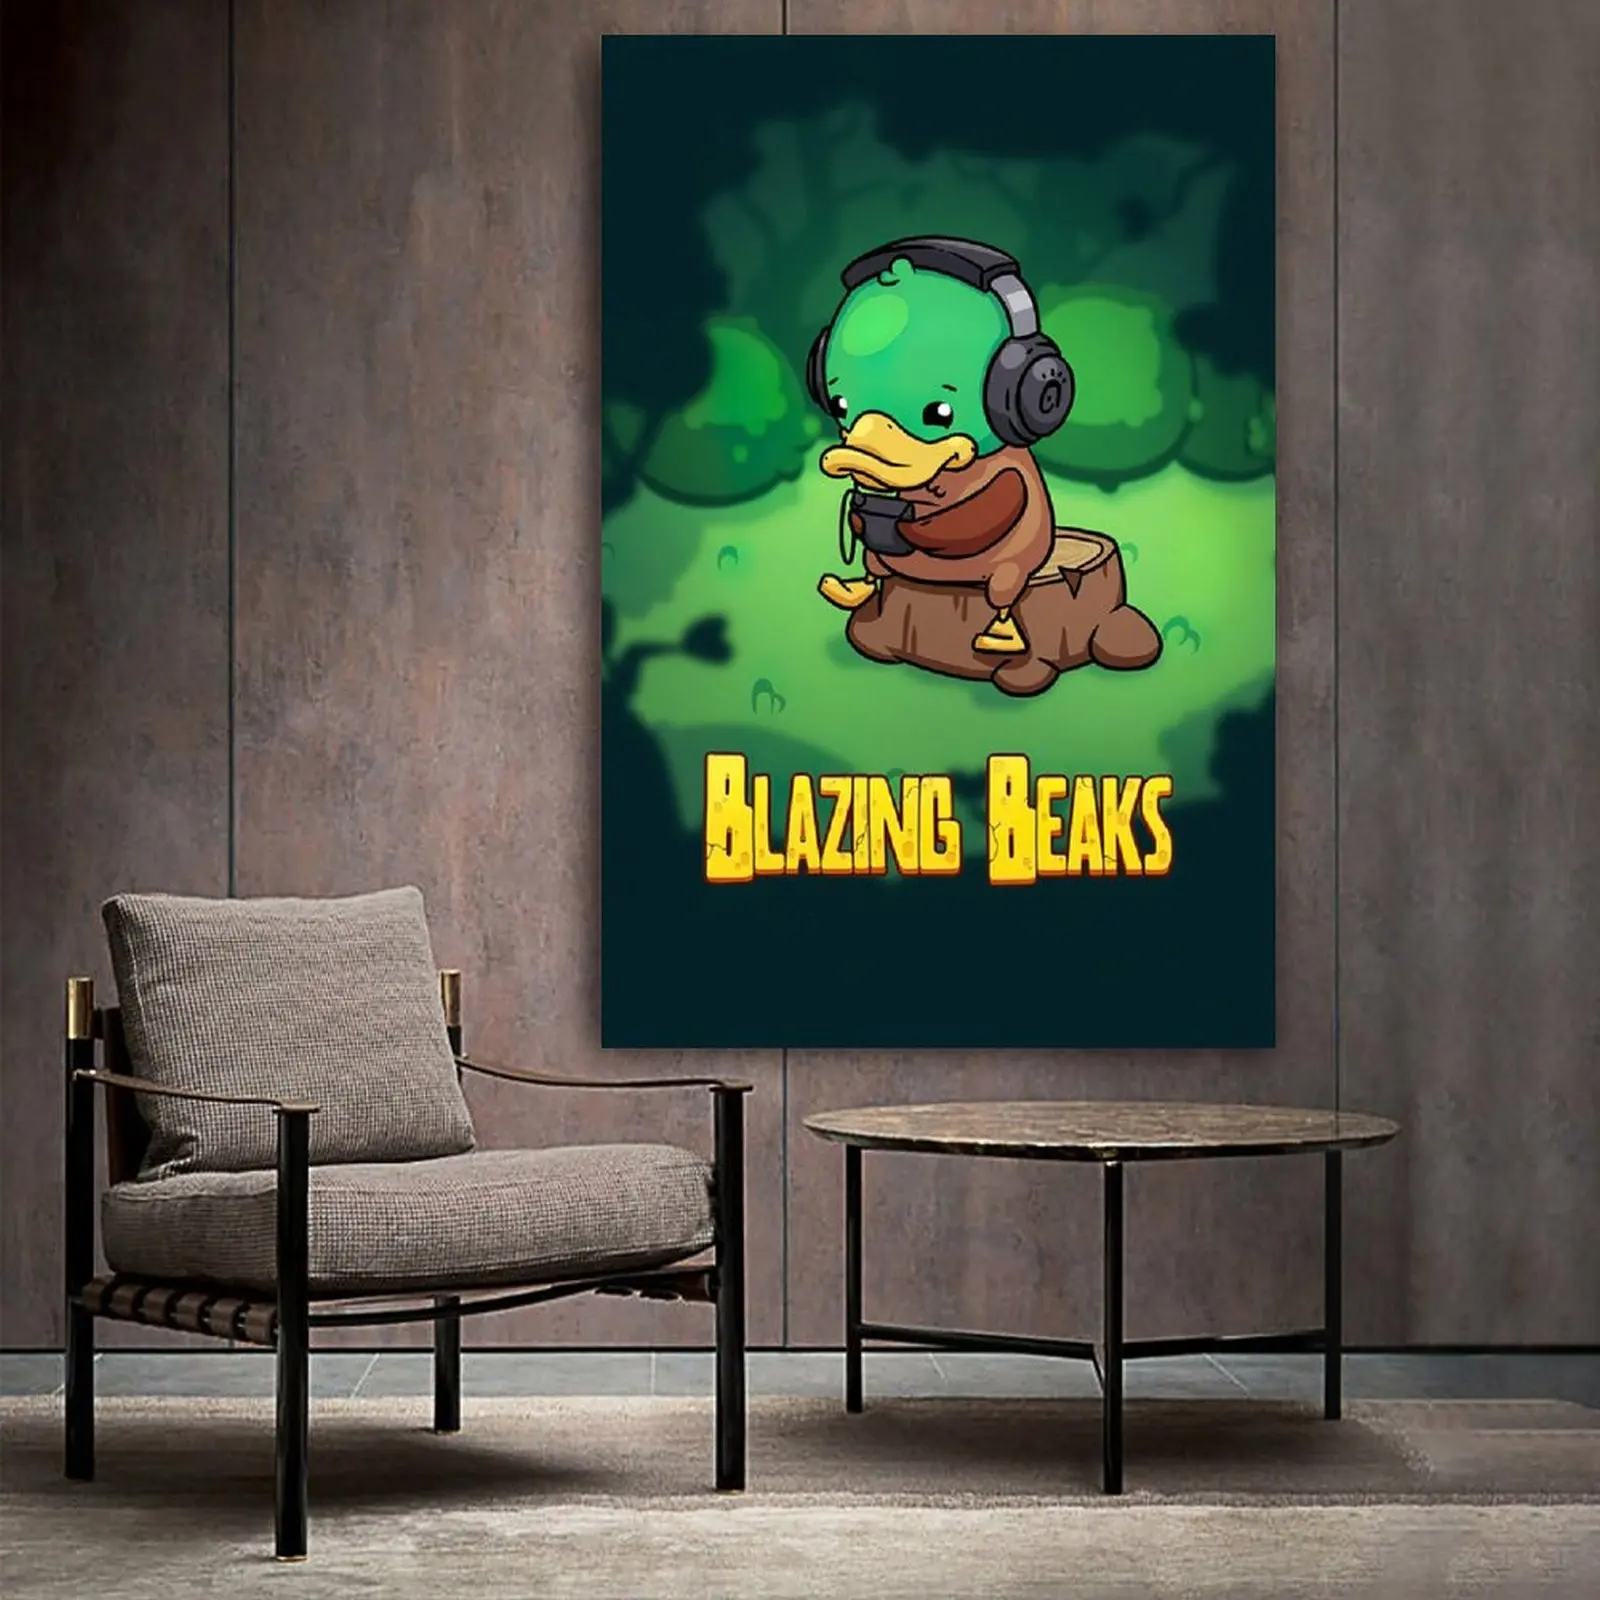 

Blazing Beaks Game Poster Poster Decorative Painting Canvas Wall Art Living Room Posters Bedroom Painting